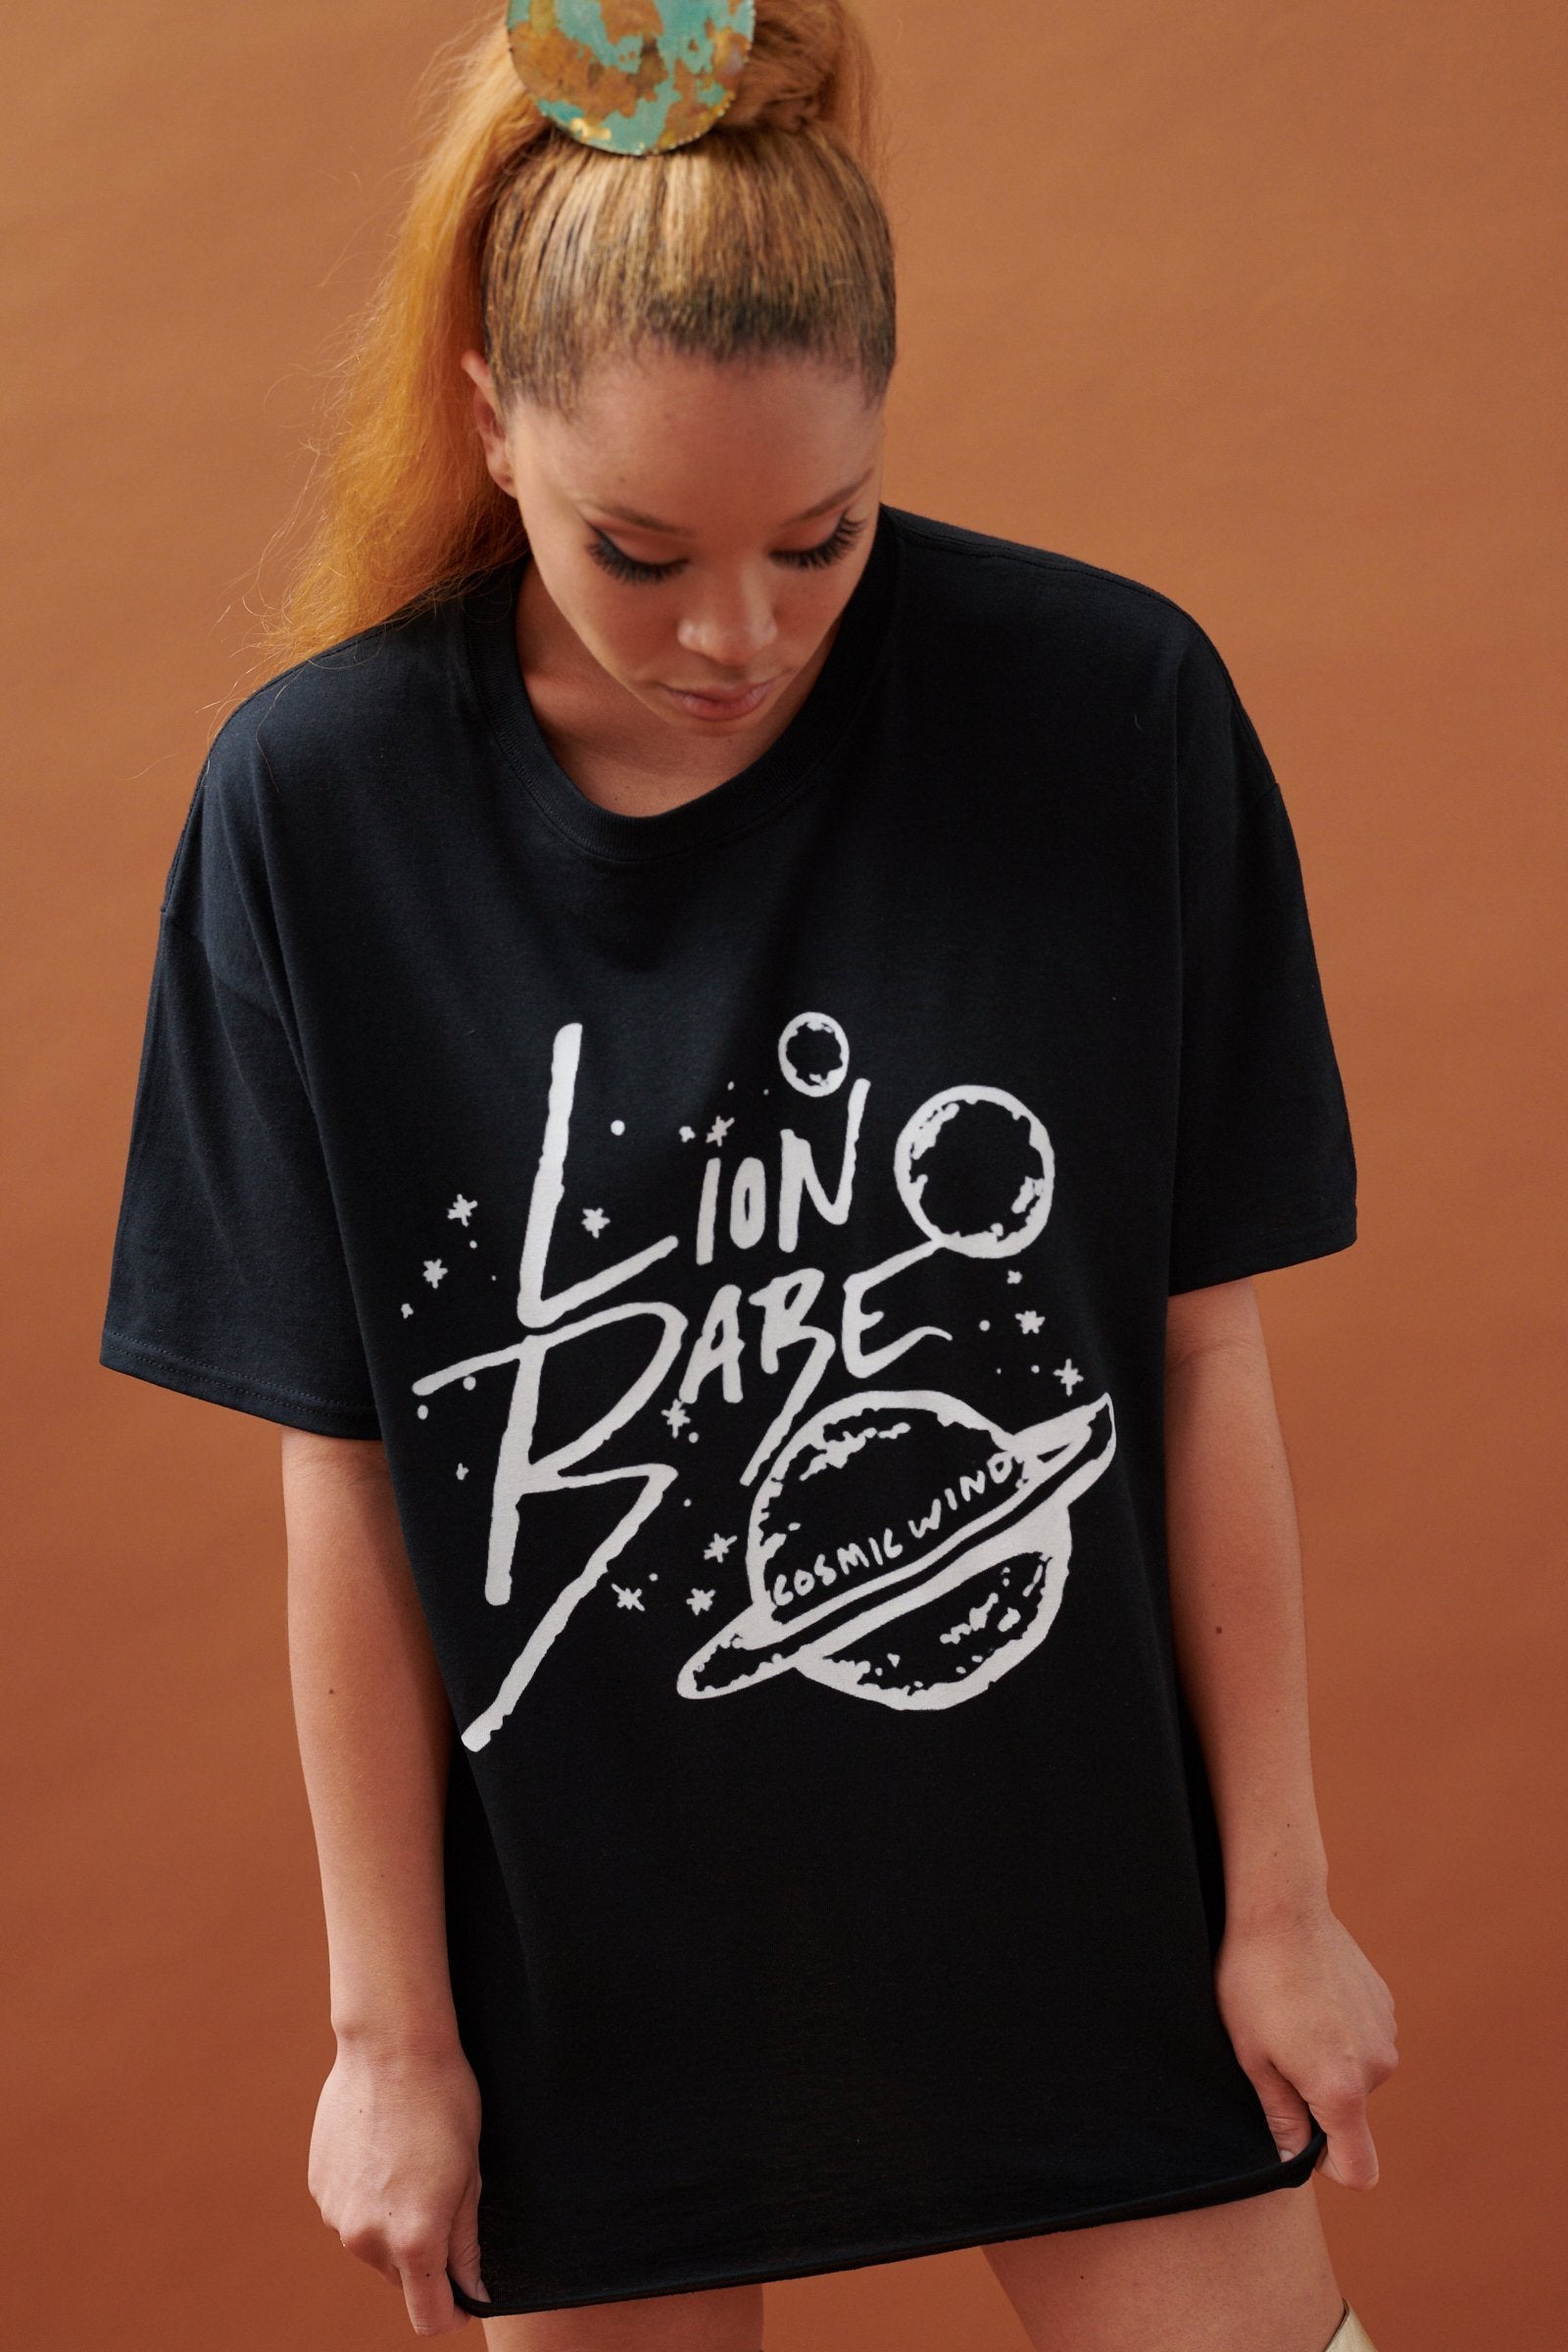 LION BABE COSMIC WIND PLANET TEE**